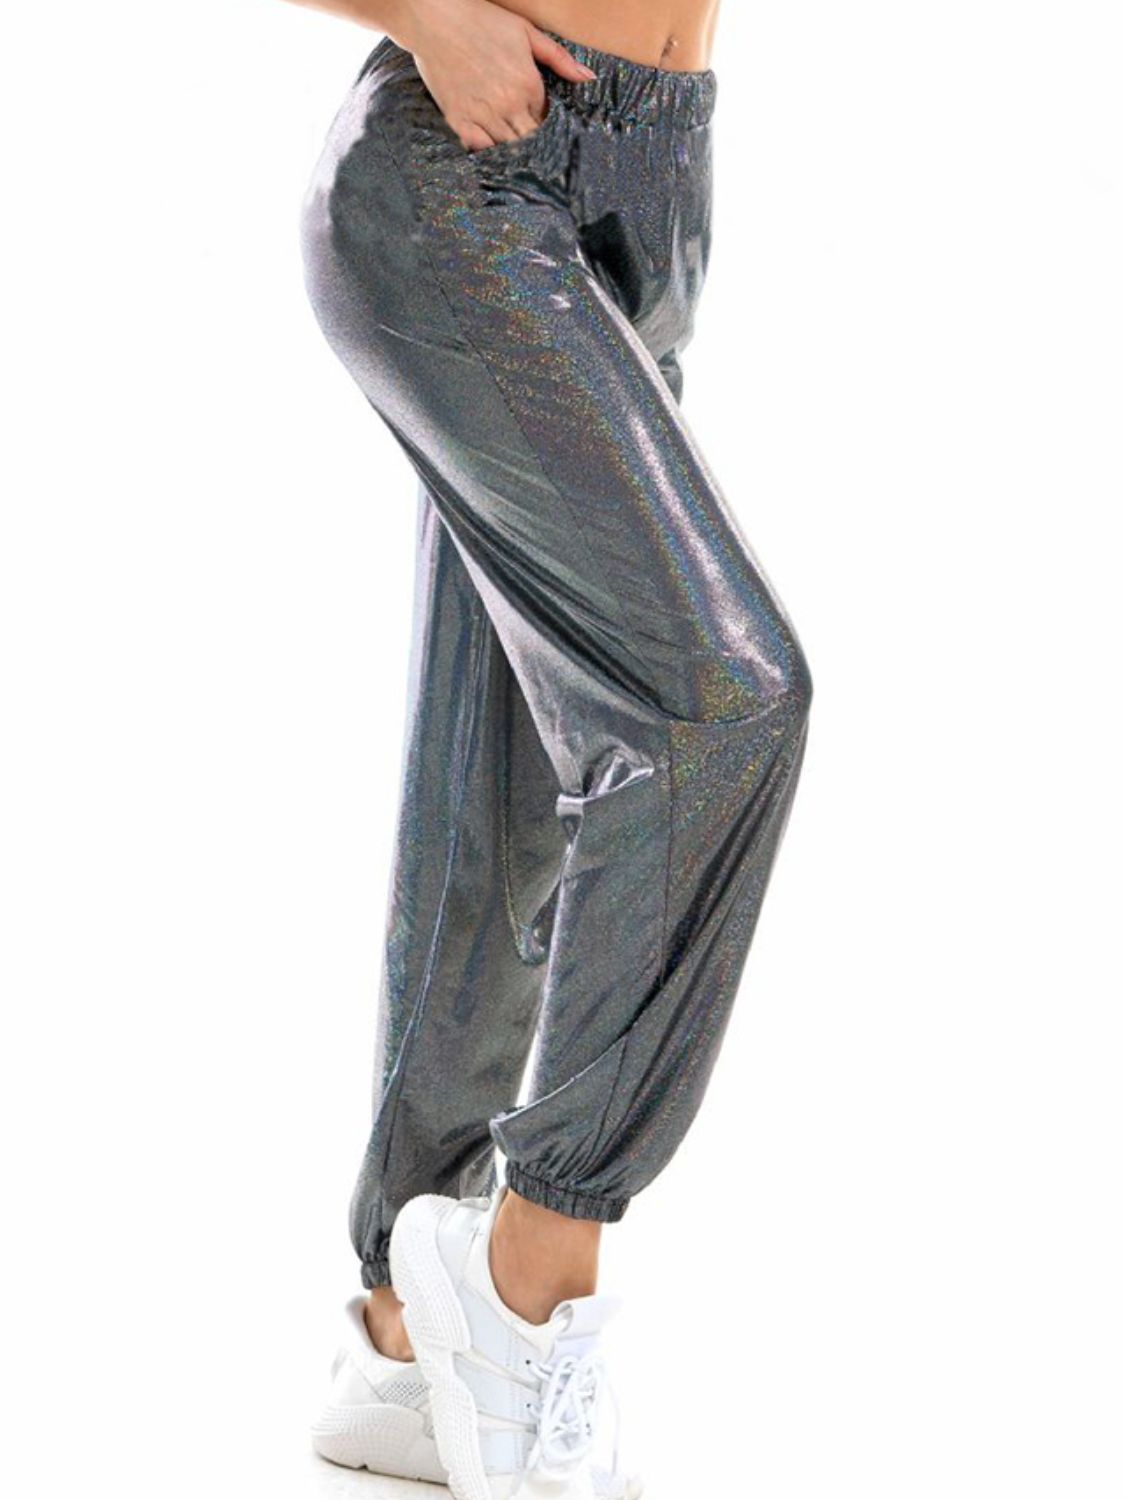 Glitter Elastic Waist Pants with Pockets in Dark Grey or Fuchsia in Size S, M, L, or XL